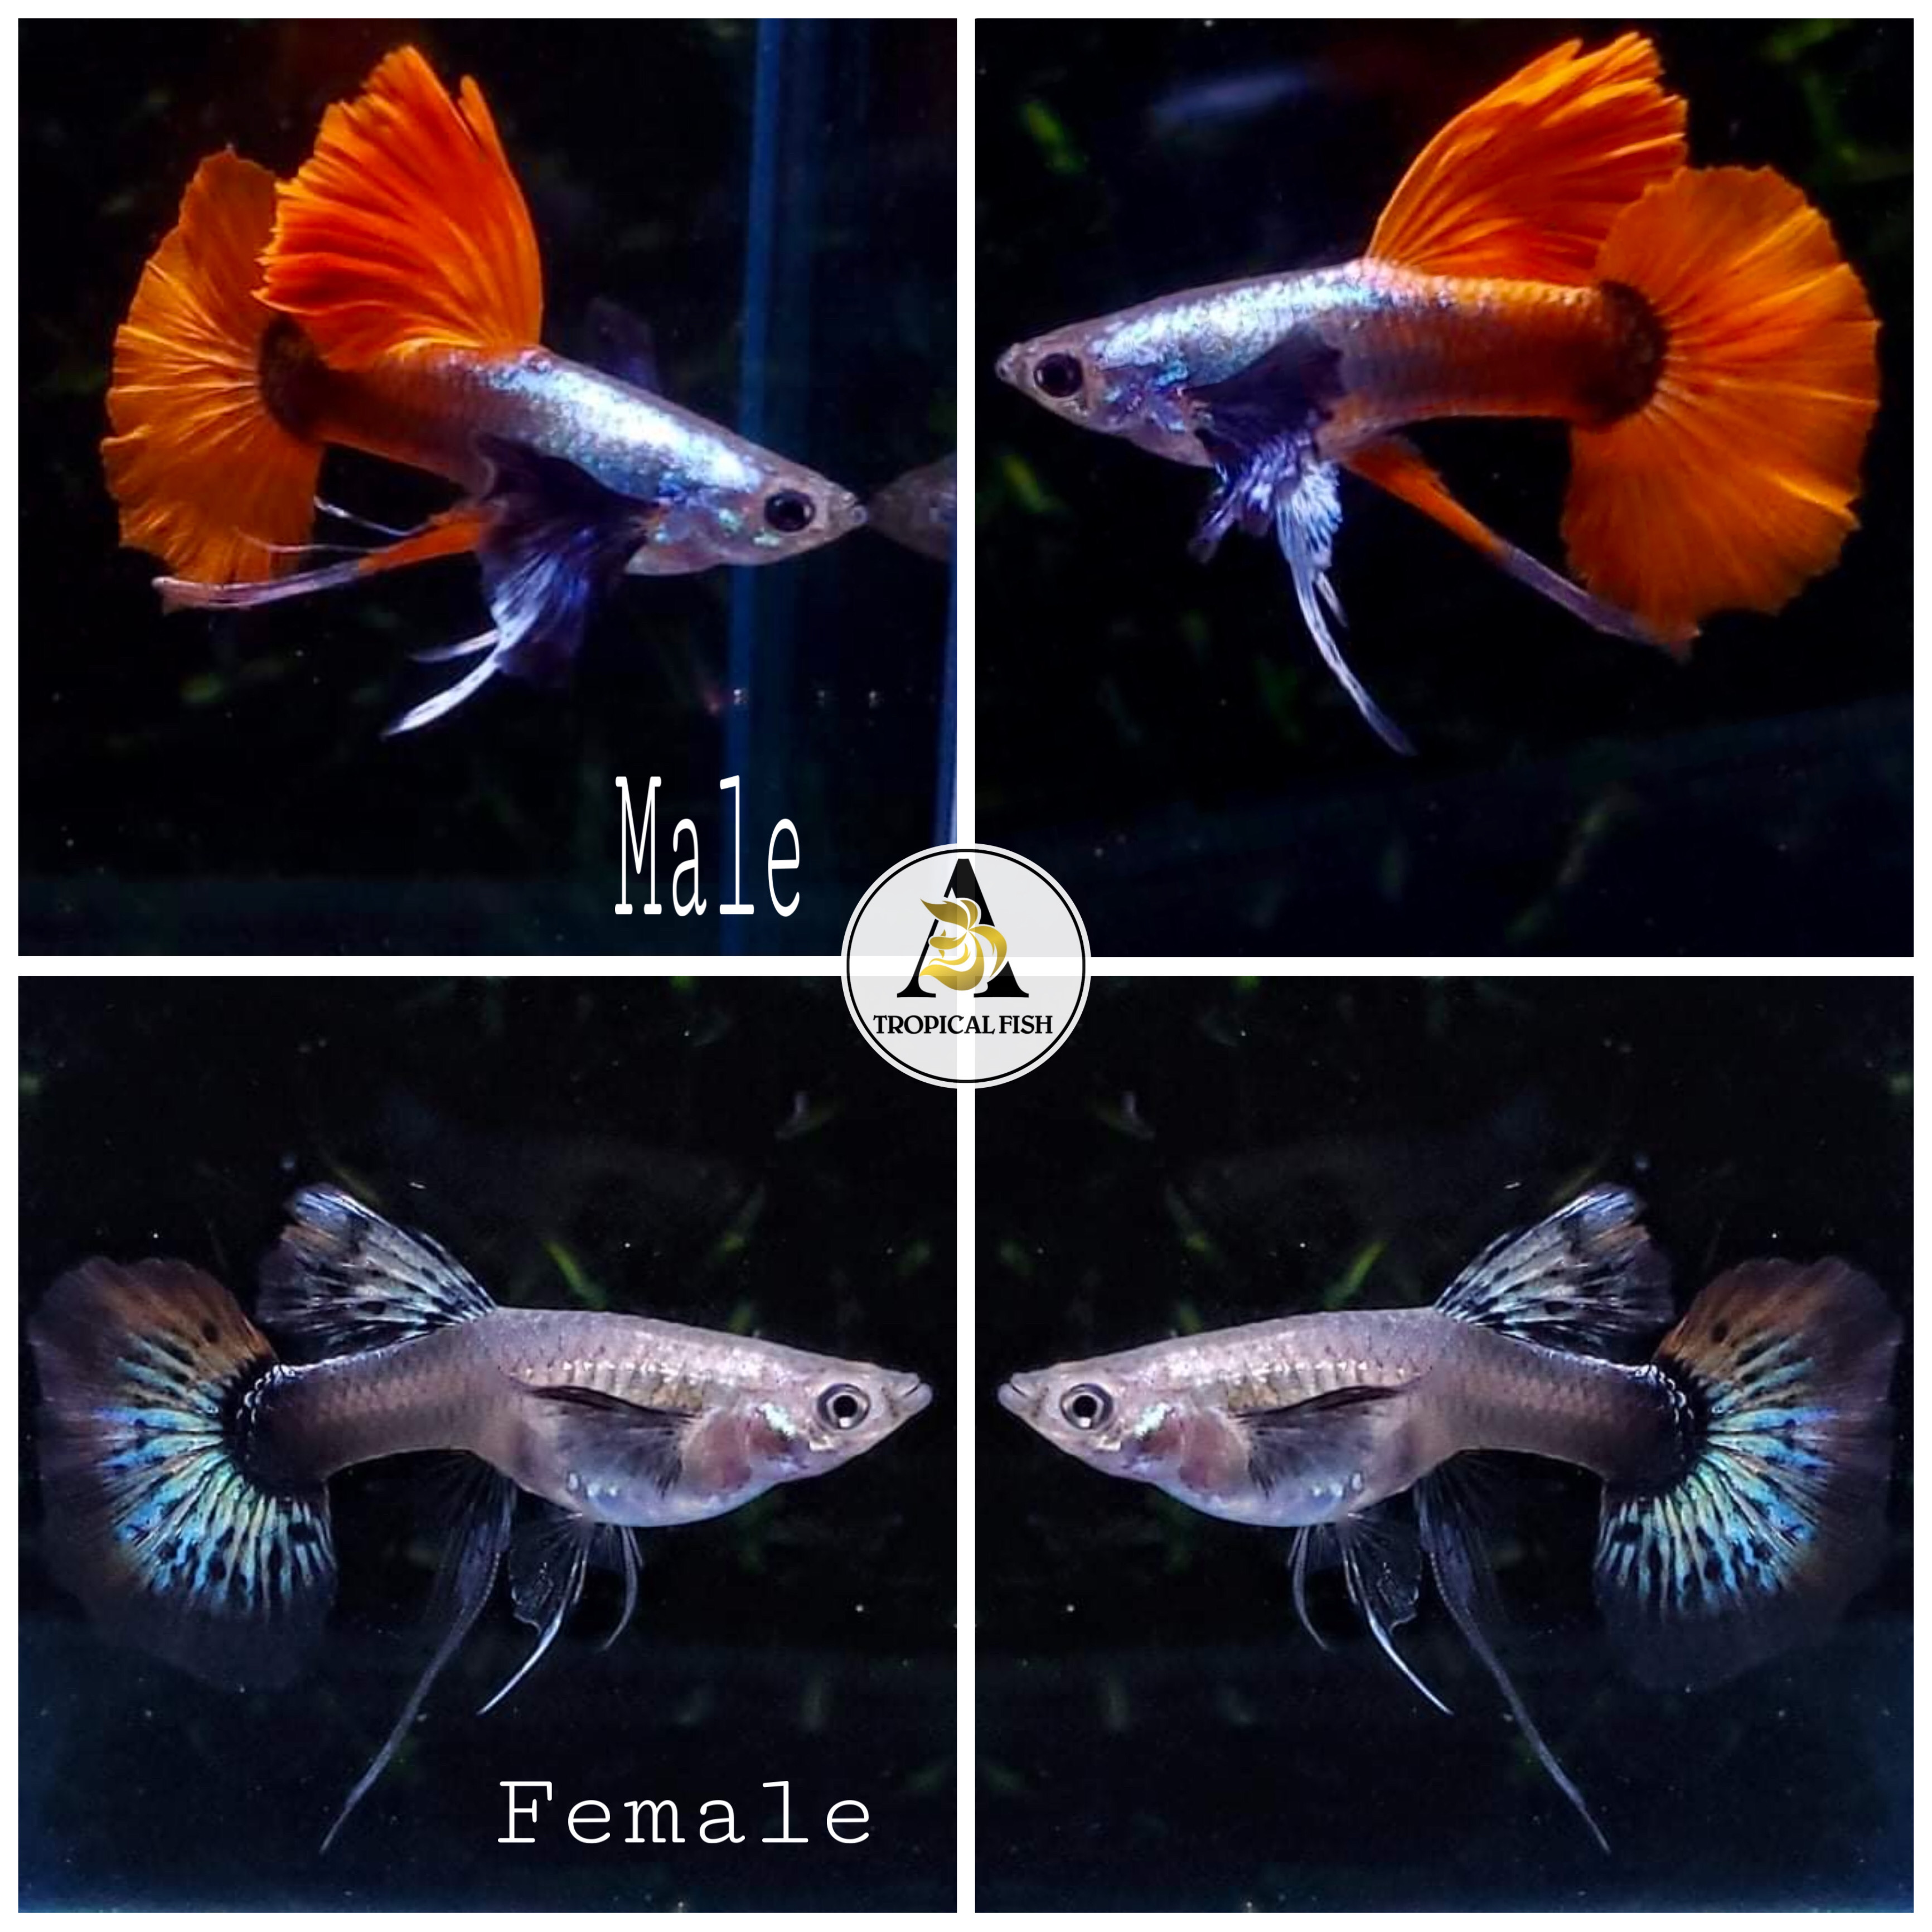 Dumbo Red Tail Ribbons Shark Fin  - Guppy